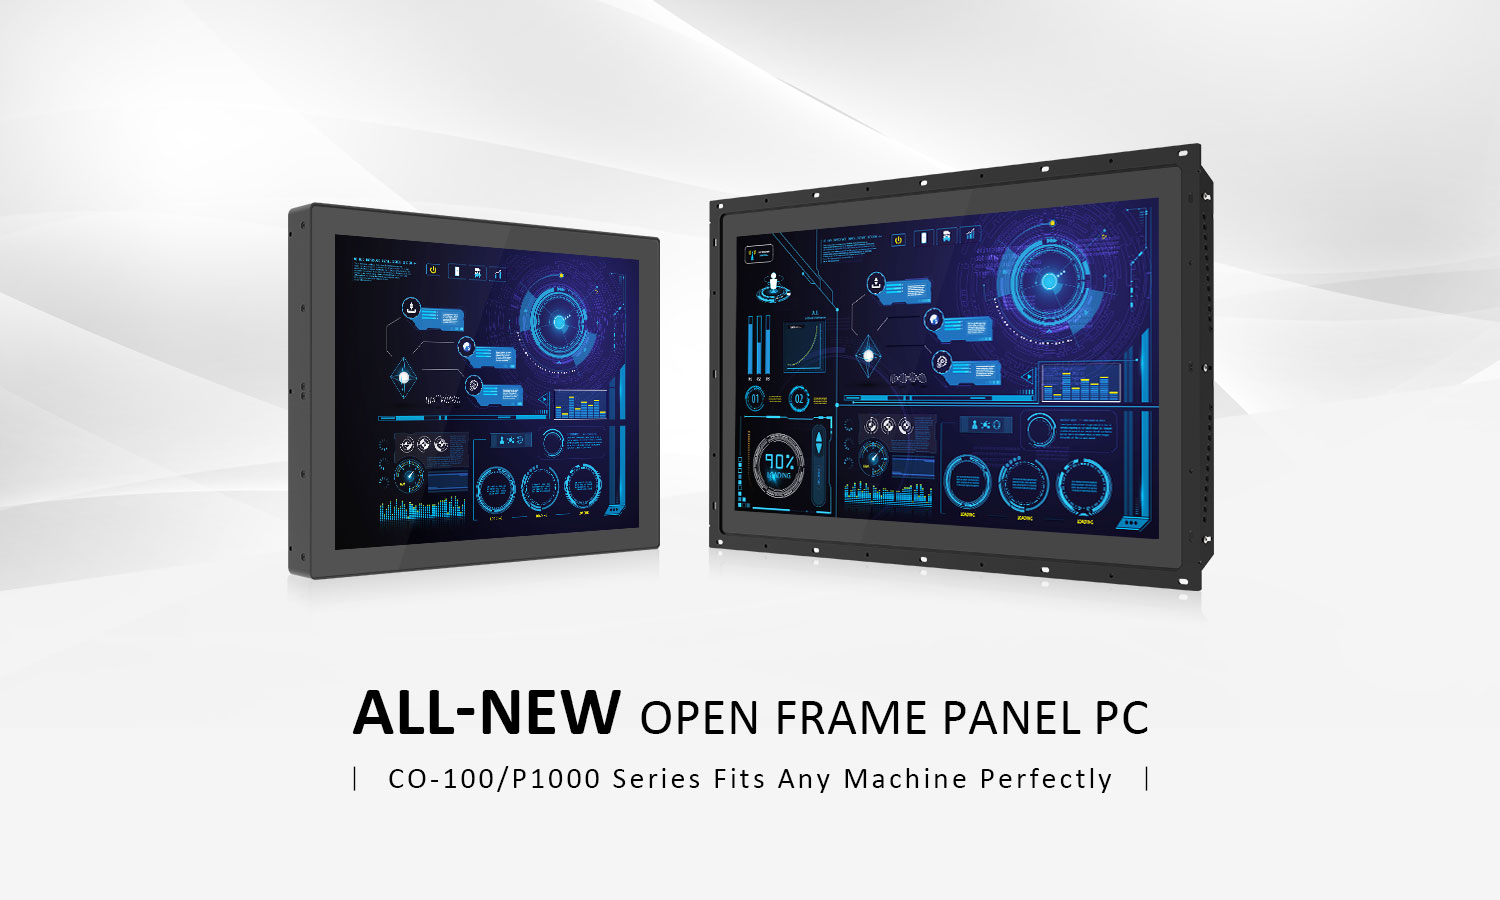 Cincoze All new open frame panel pc - CO-100/P1000 Series Fits Any Machine Perfectly